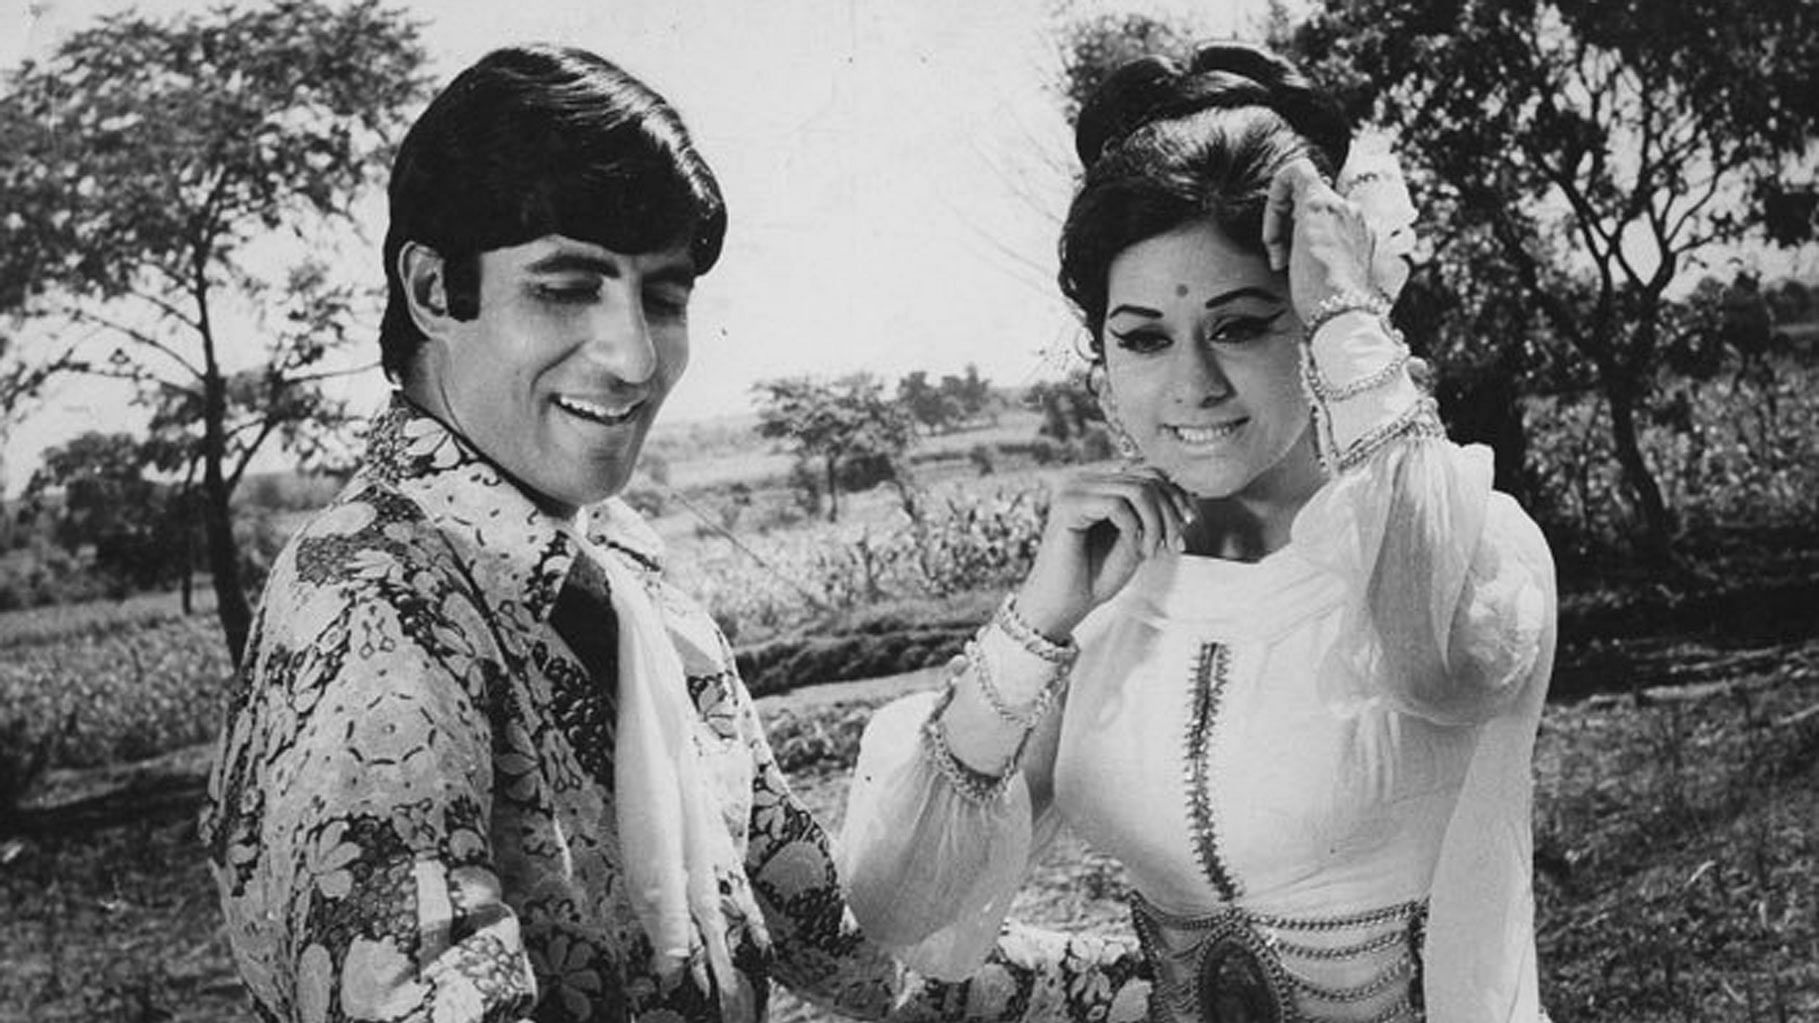 Even after 44 years Amitabh Bachchan clearly remembers his <i>Bombay to Goa</i> journey (Photo: srbachchan.tumblr.com)